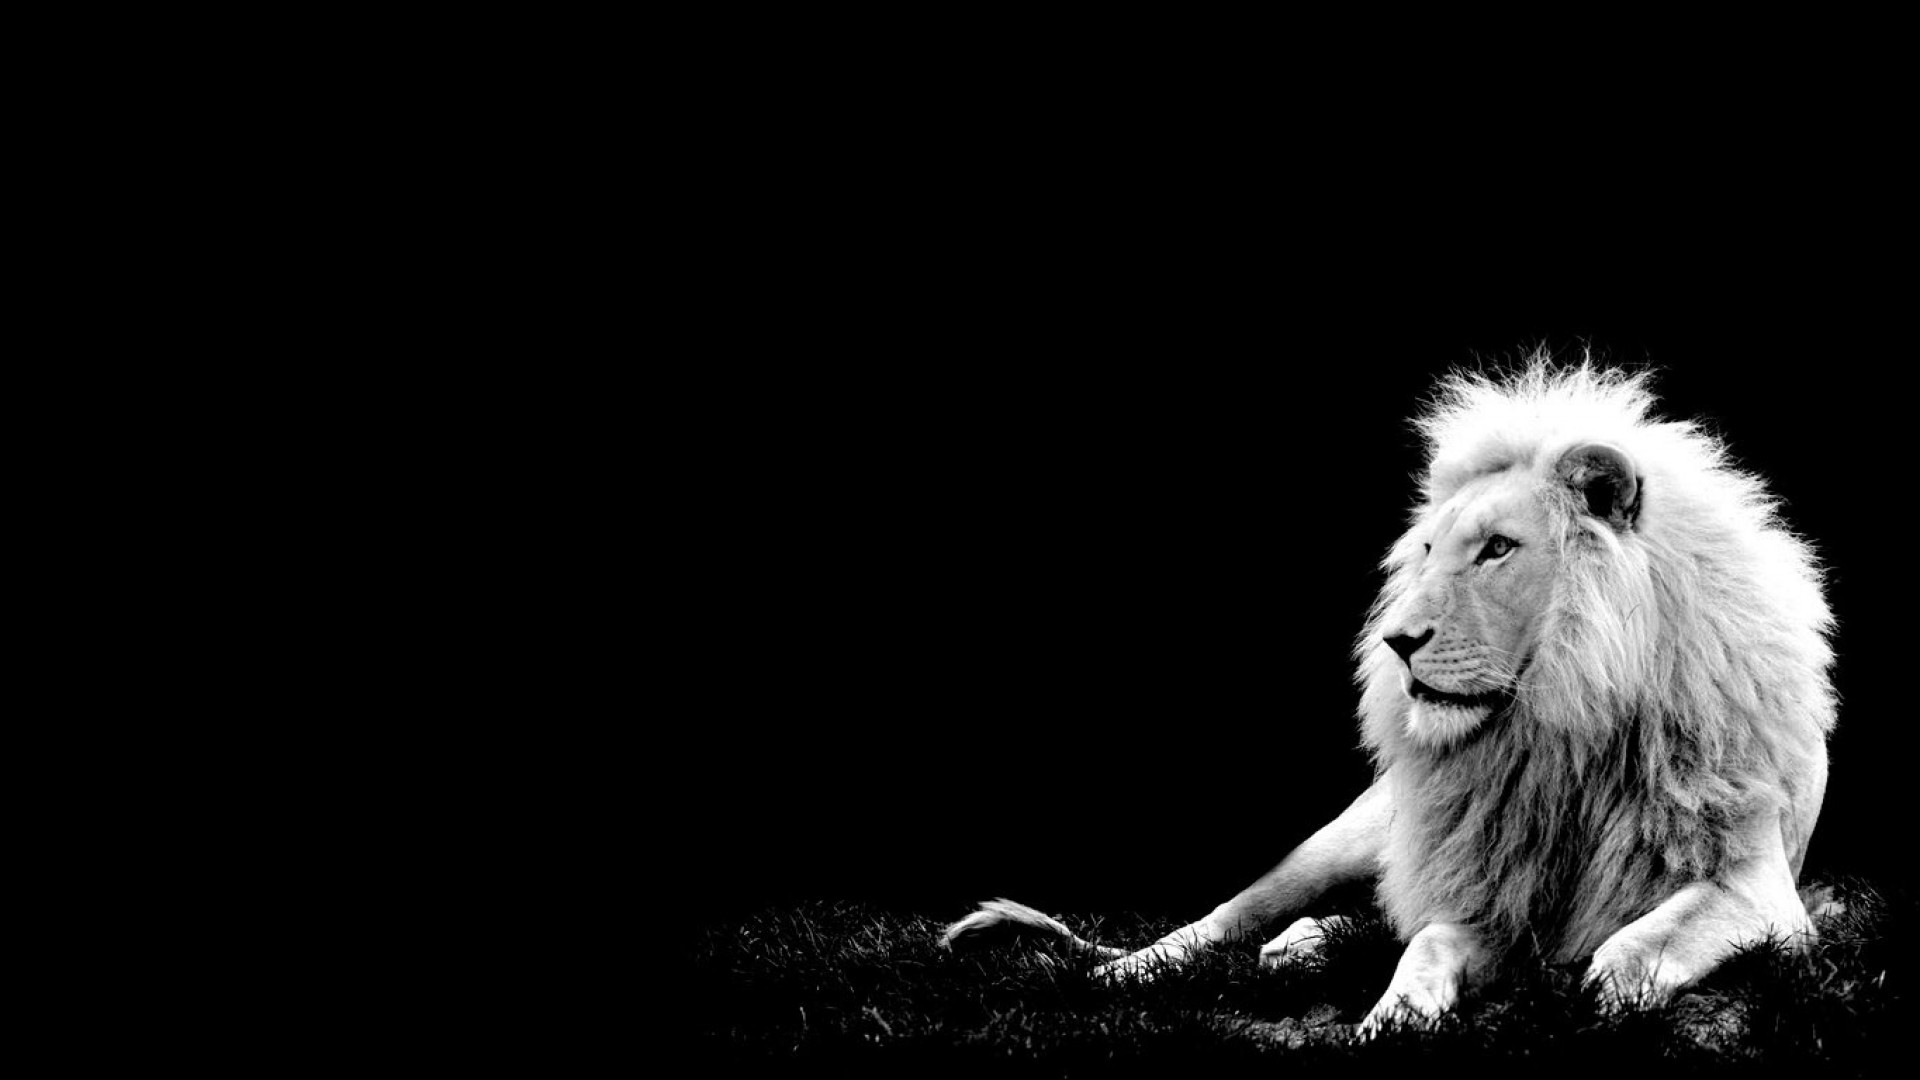 Lion Wallpaper Black And White Image Amp Pictures Becuo